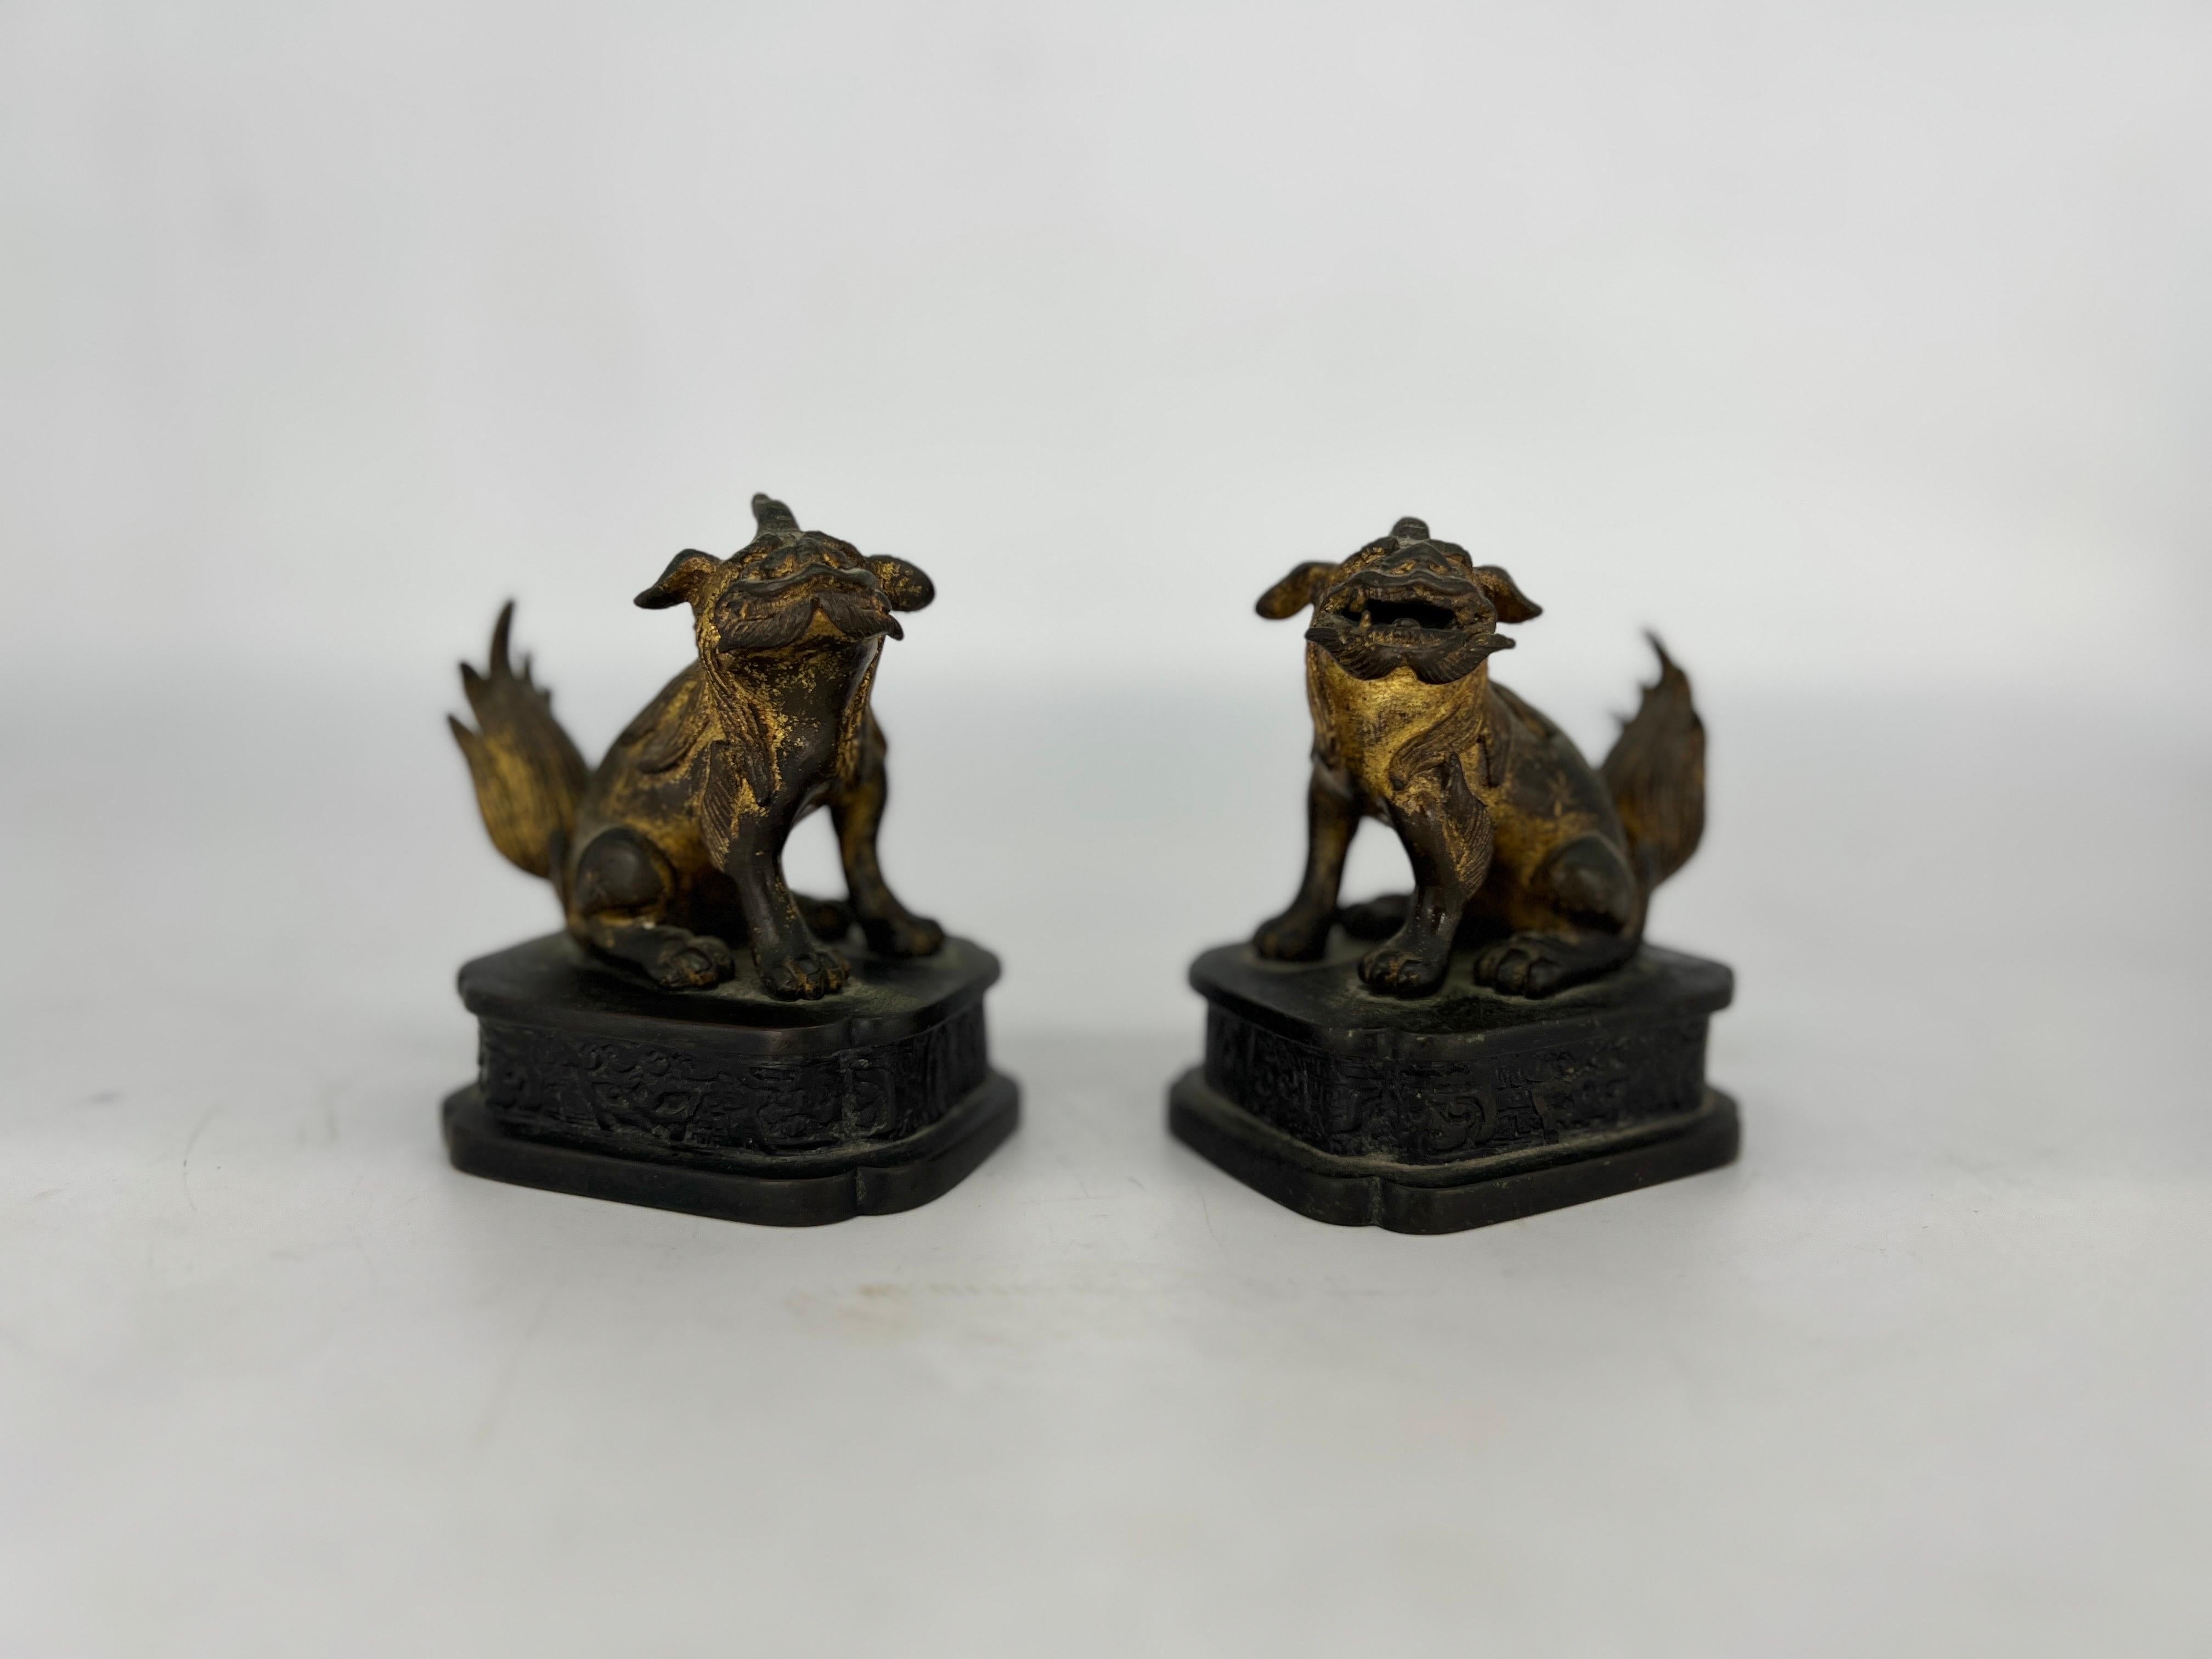 Chinese, Ming Dynasty. 
Pair, Ming Dynasty Gilt Bronze Diminutive Chinese Foo Dogs or Guardian Lions of extraordinary quality and casting. Procured from an important New York Collection. 

